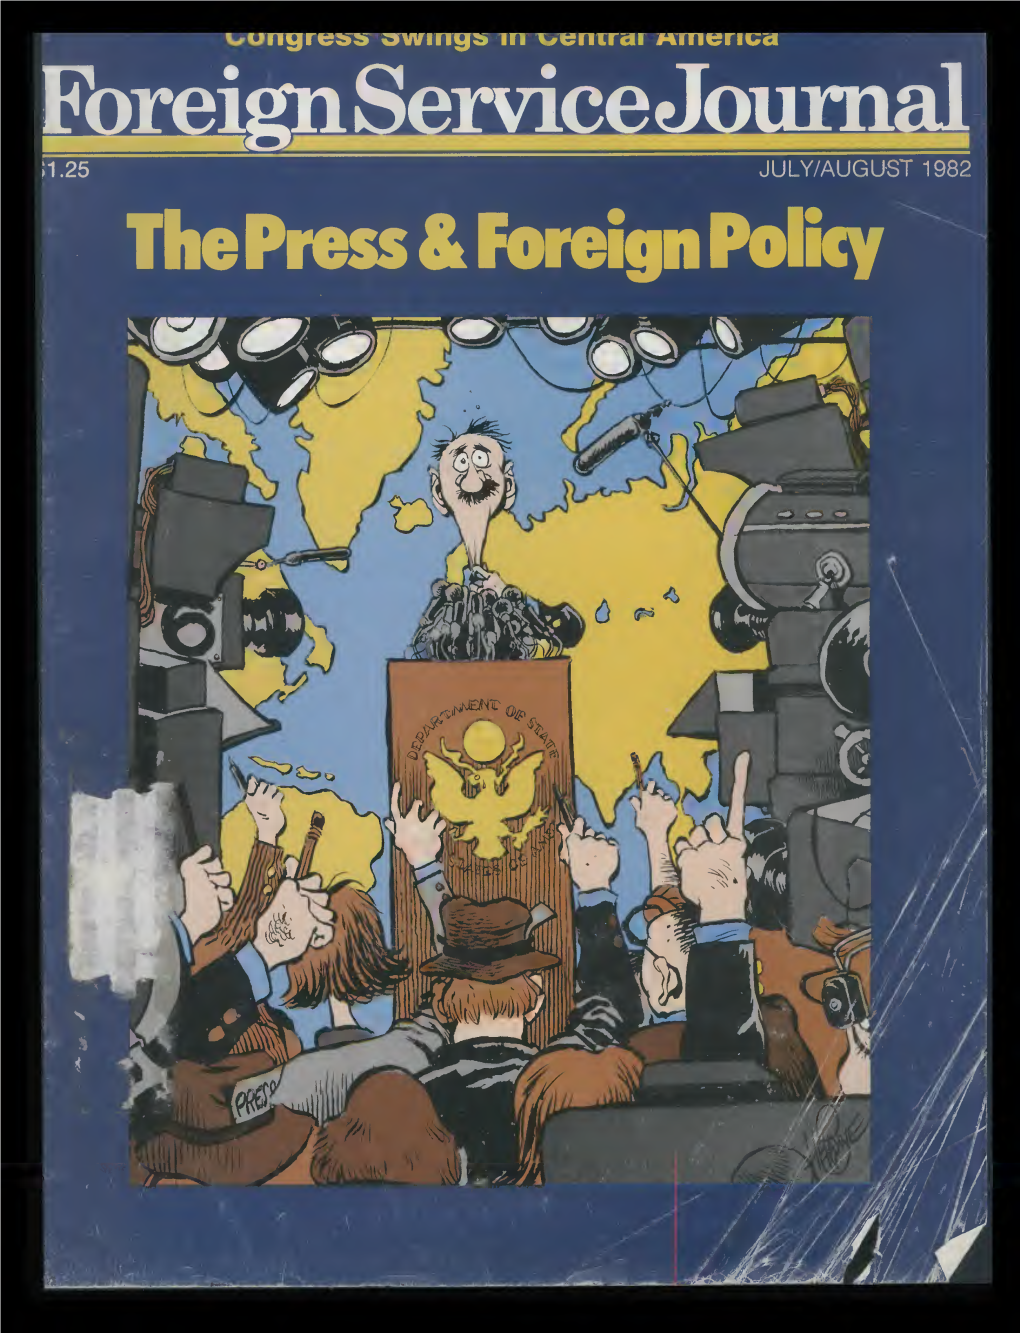 The Foreign Service Journal, July-August 1982